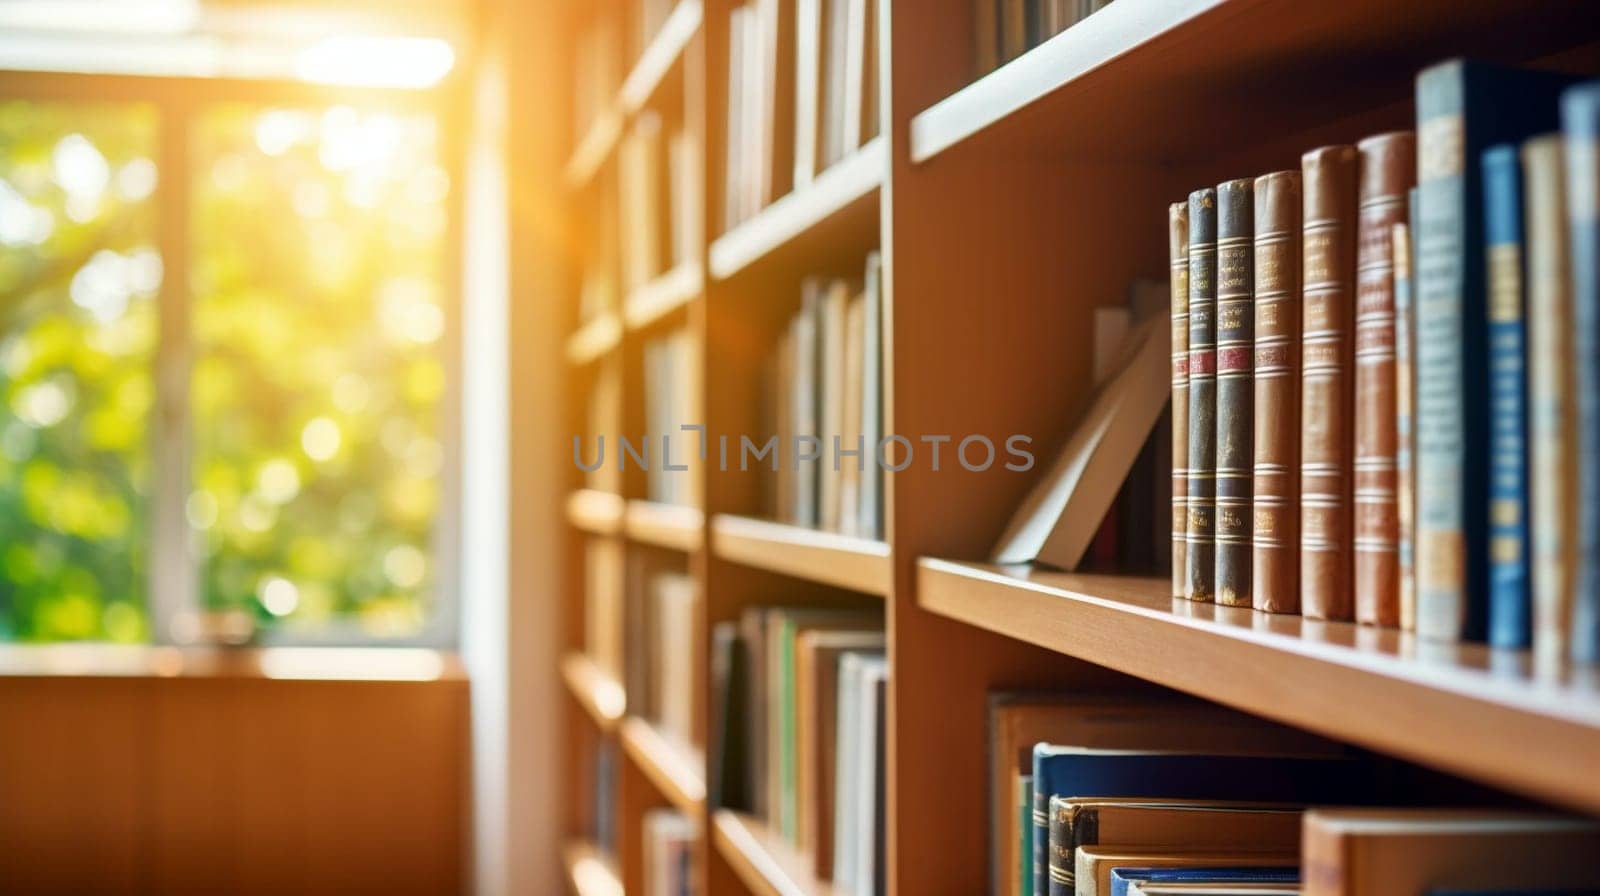 A row of bookshelves made of hardwood filled with publications in a library building, with sunlight streaming in through the window